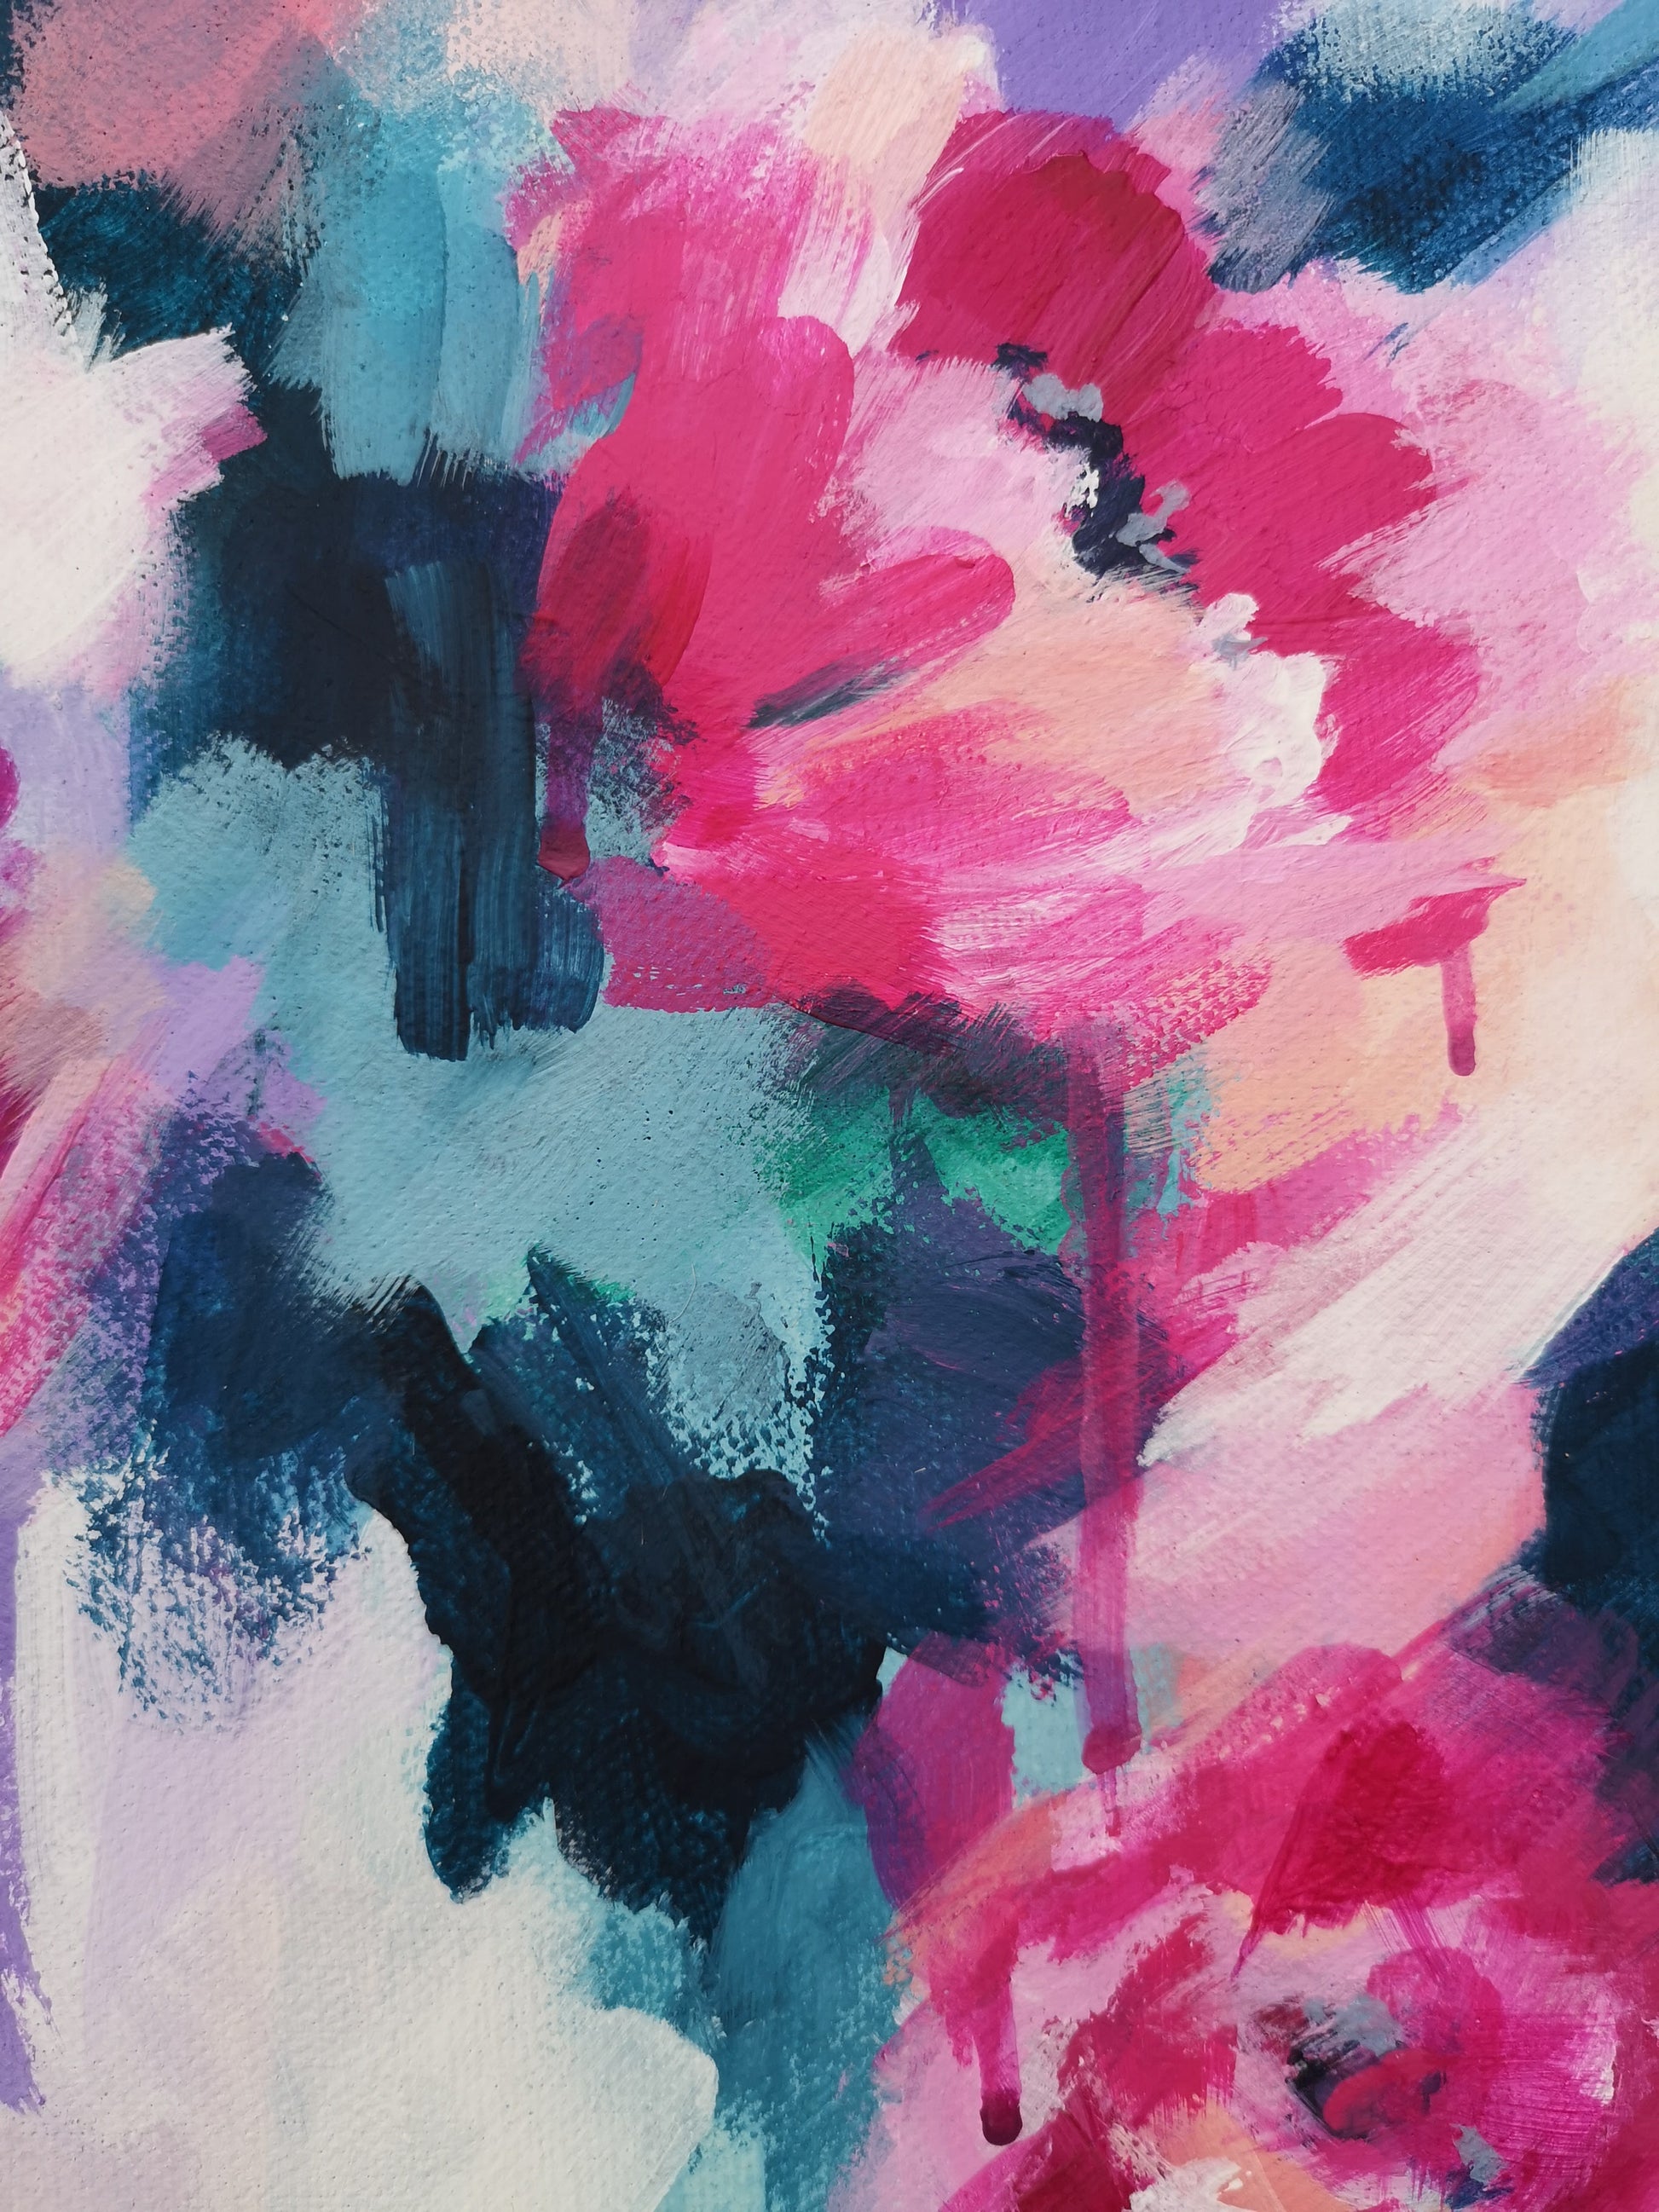 floral details from Contemporary original abstract floral painting by Judy Century 'Fancy Free' 61x61cm